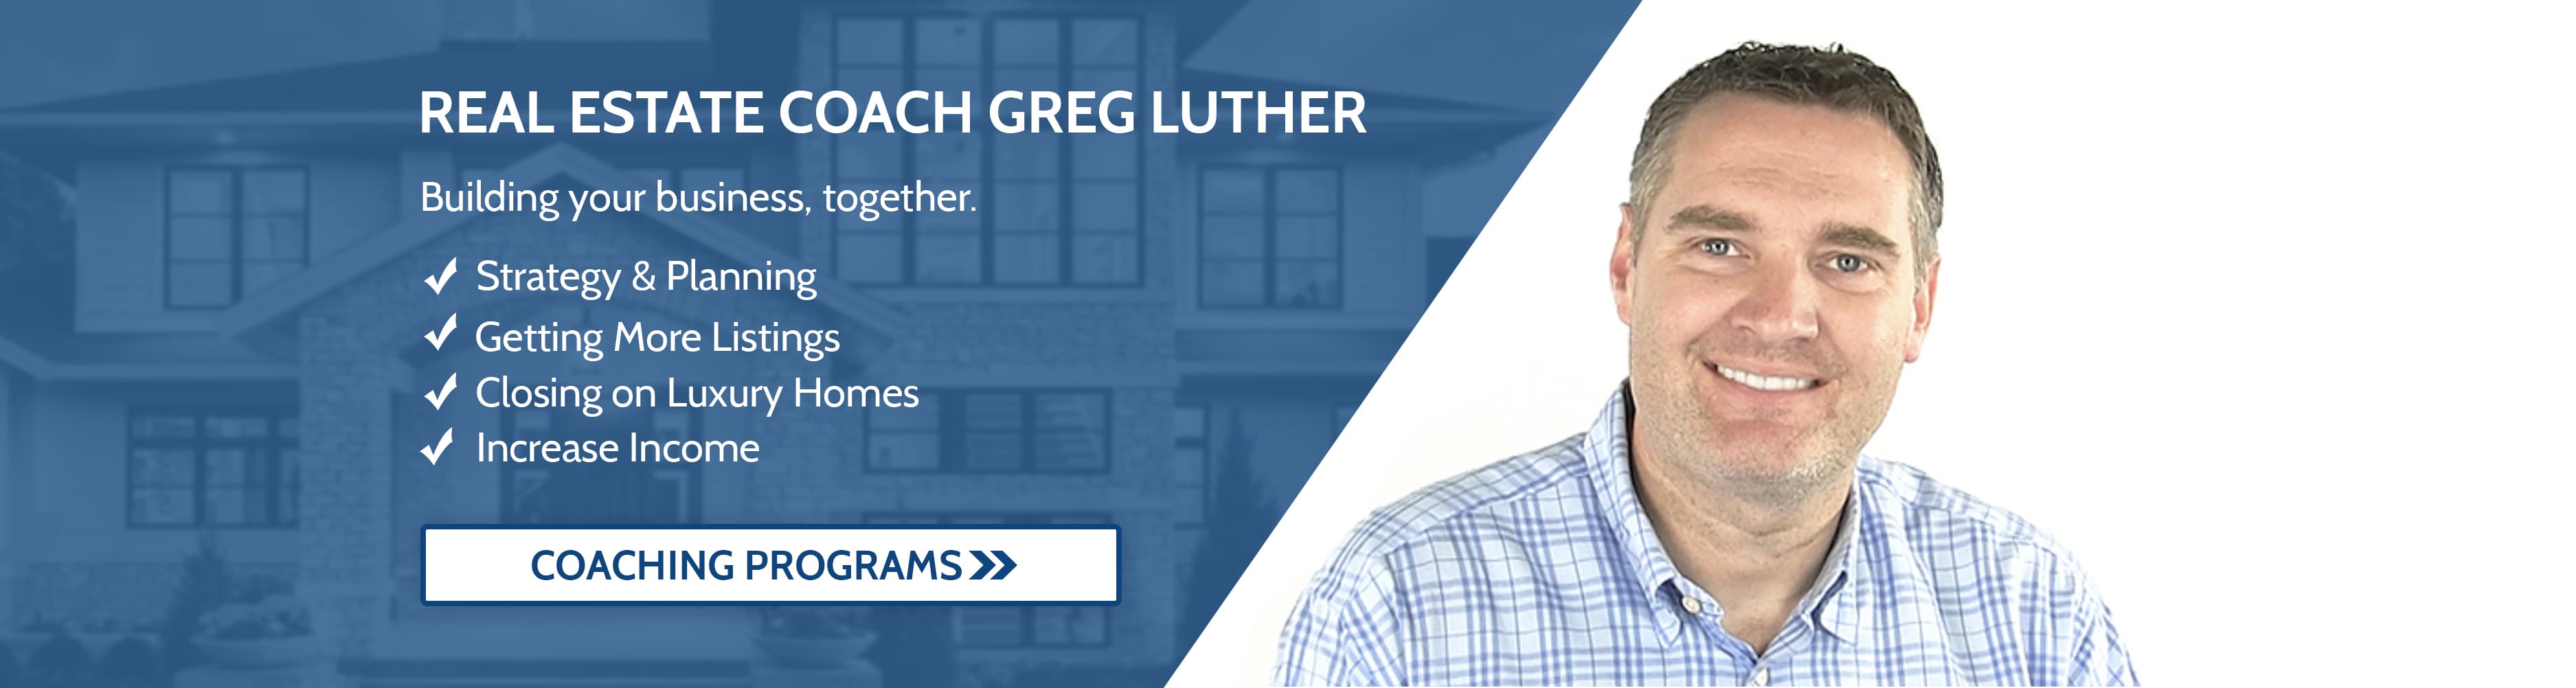 Greg Luther Real Estate Coach